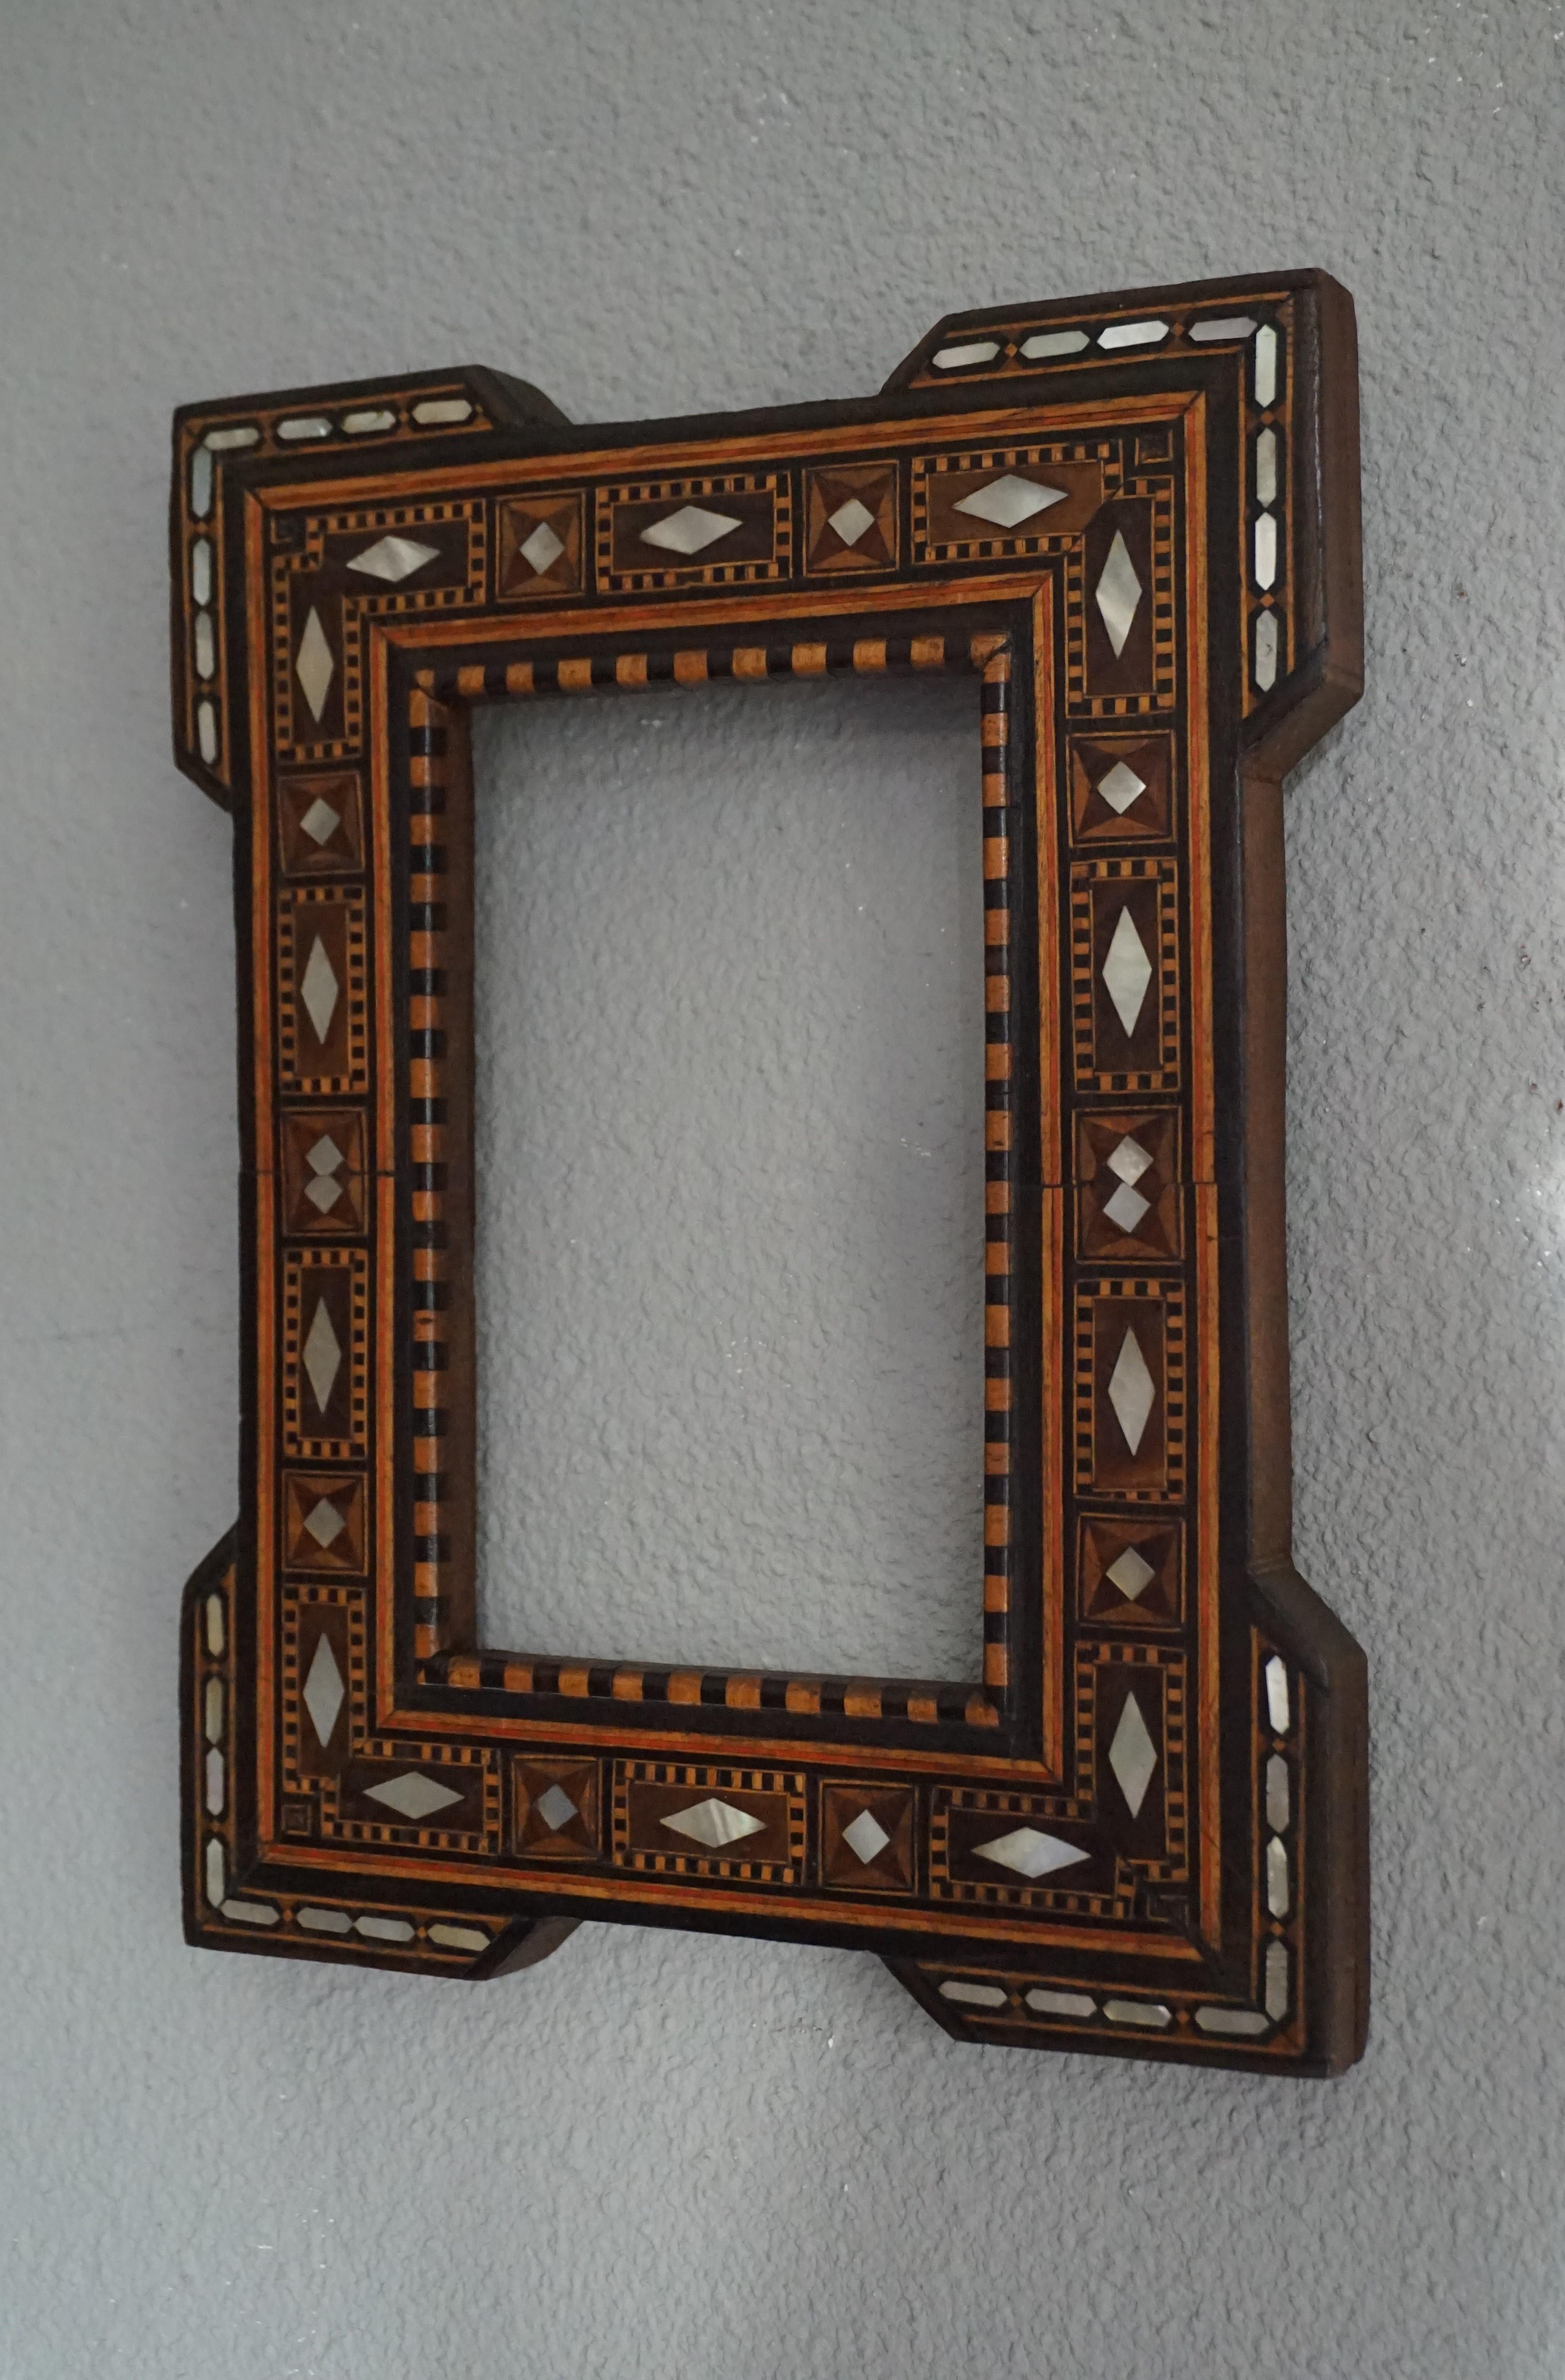 All handcrafted and very stylish pair of photo frames with inlaid Islamic designs.

You don't necessary need to have an Arabic (inspired) interior to fall in love and decorate your home with these stunning Moorish picture frames. The workmanship is